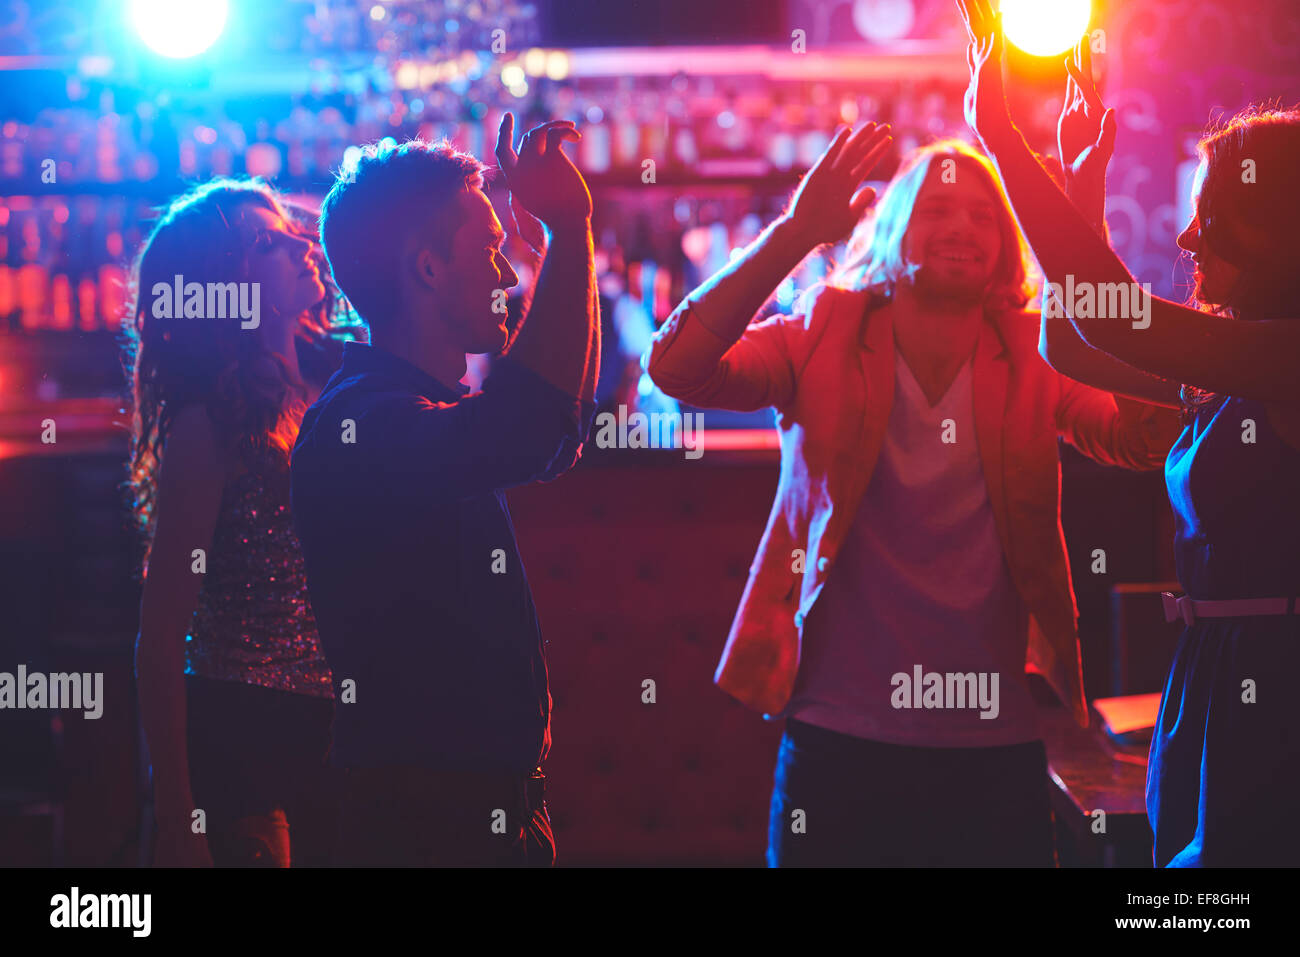 Portrait of happy friends dancing by the bar counter Stock Photo - Alamy